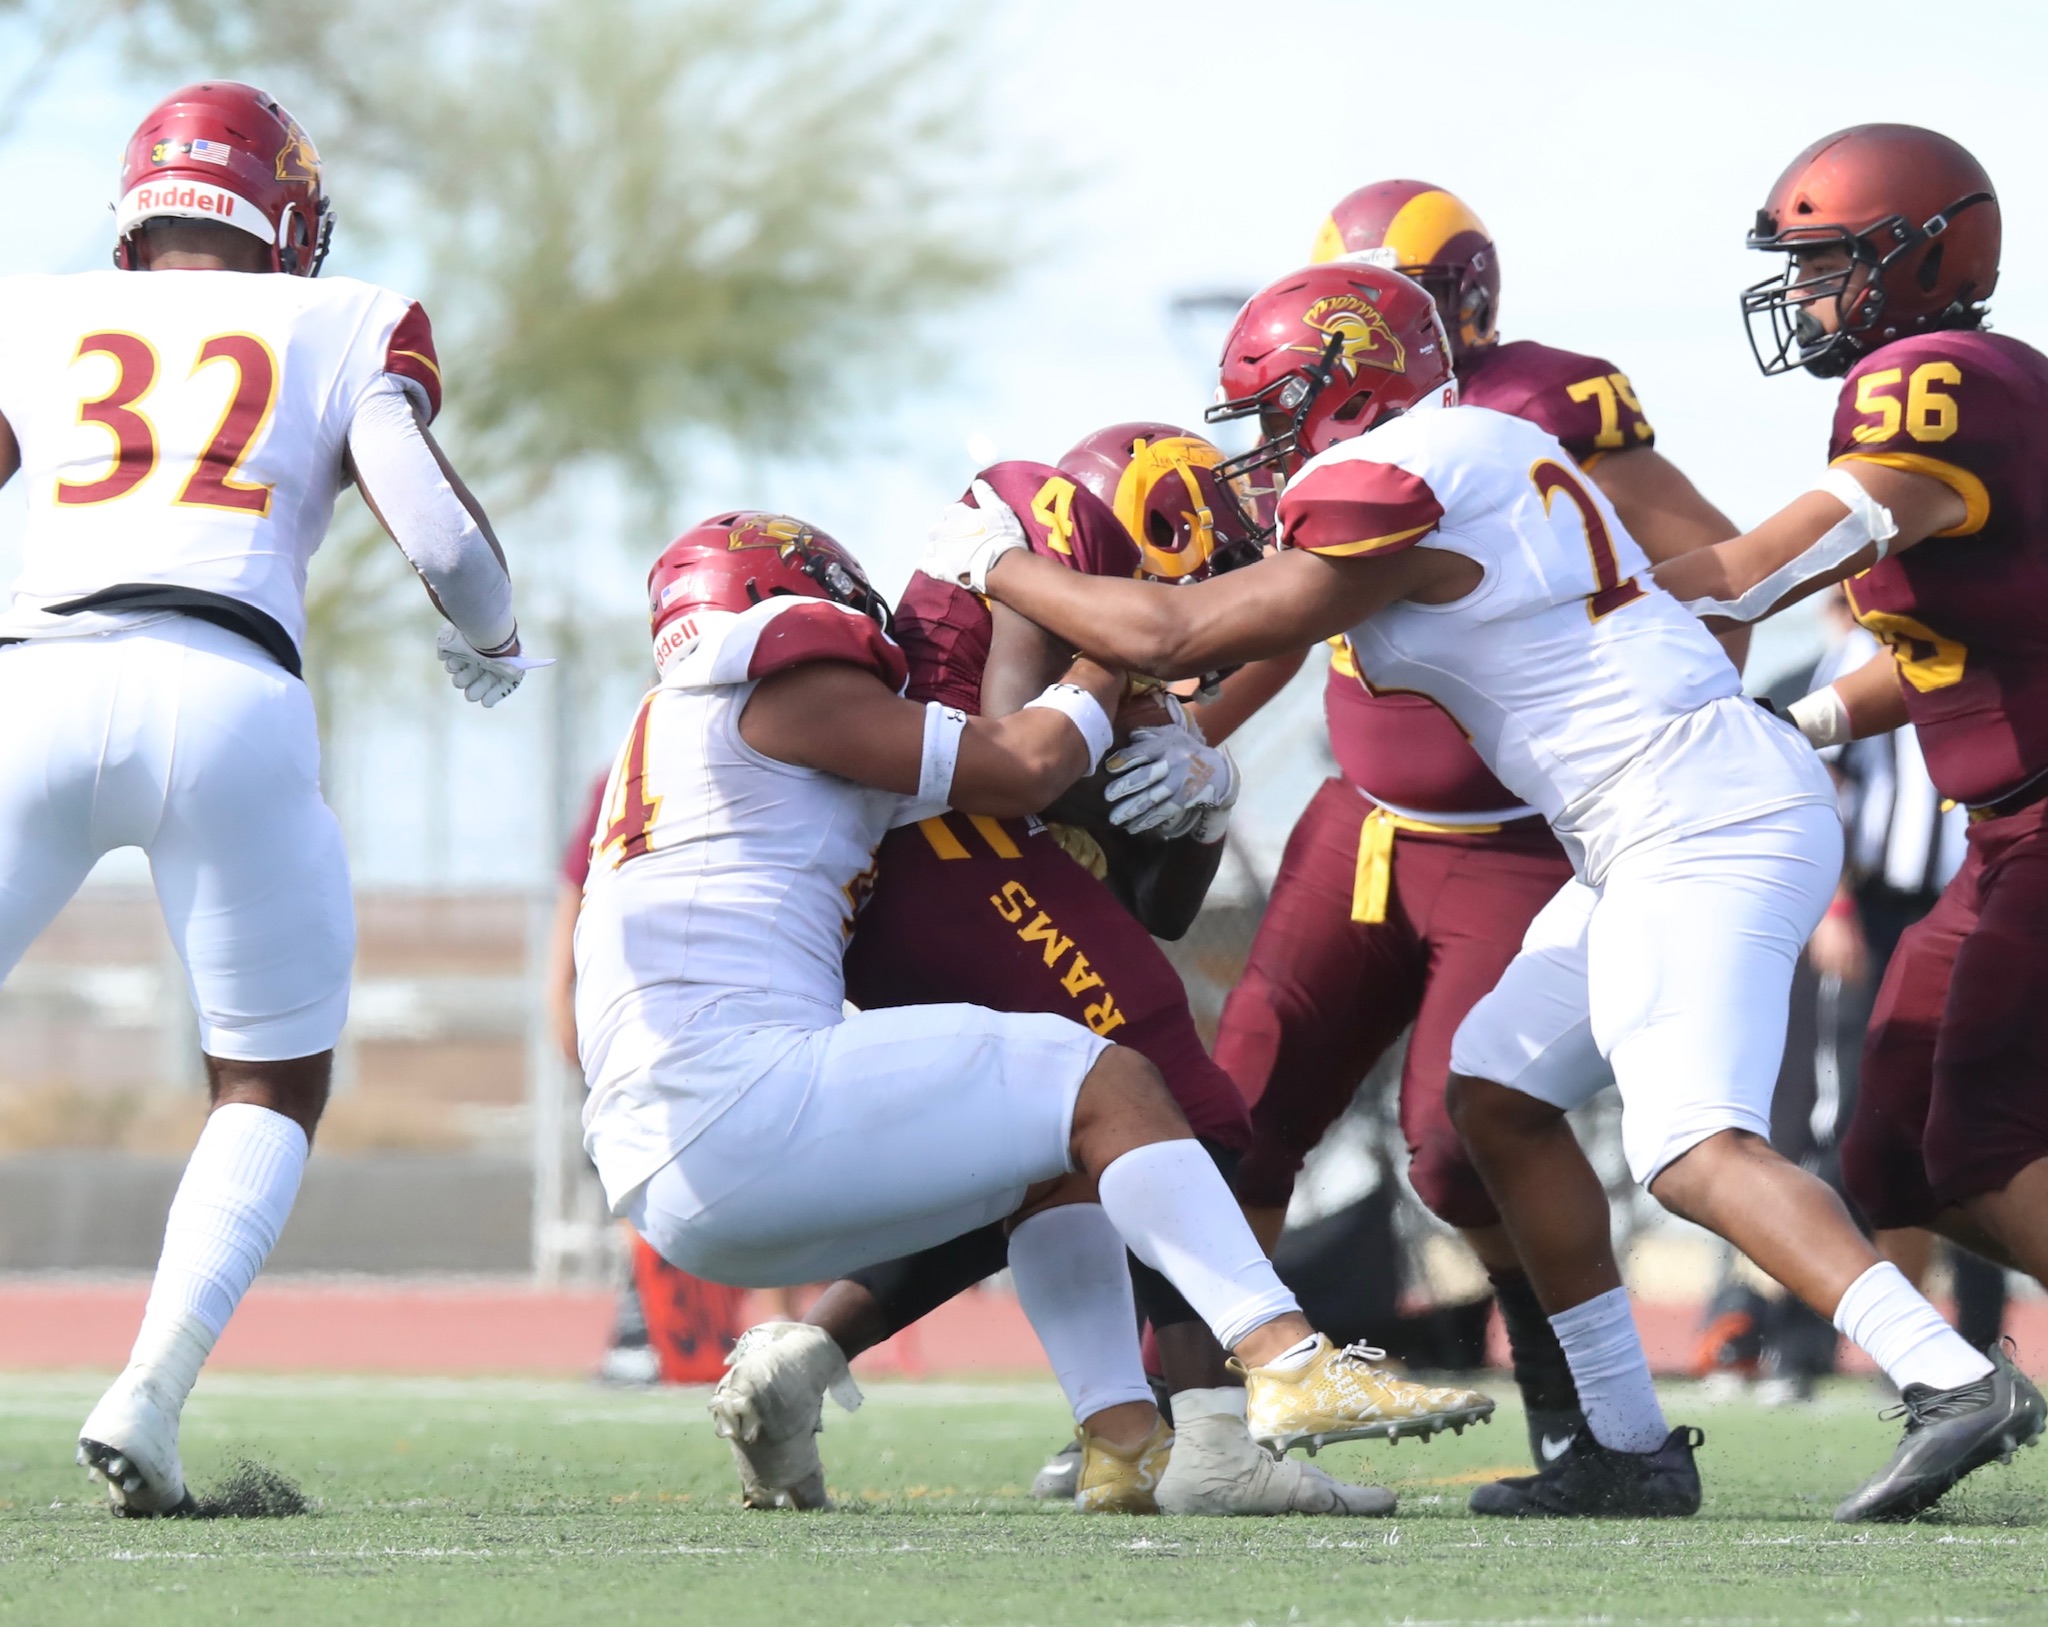 The PCC defense swarms on a tackle during the Lancers win over Victor Valley at Adelanto High School on Saturday (photo by Michael Watkins).